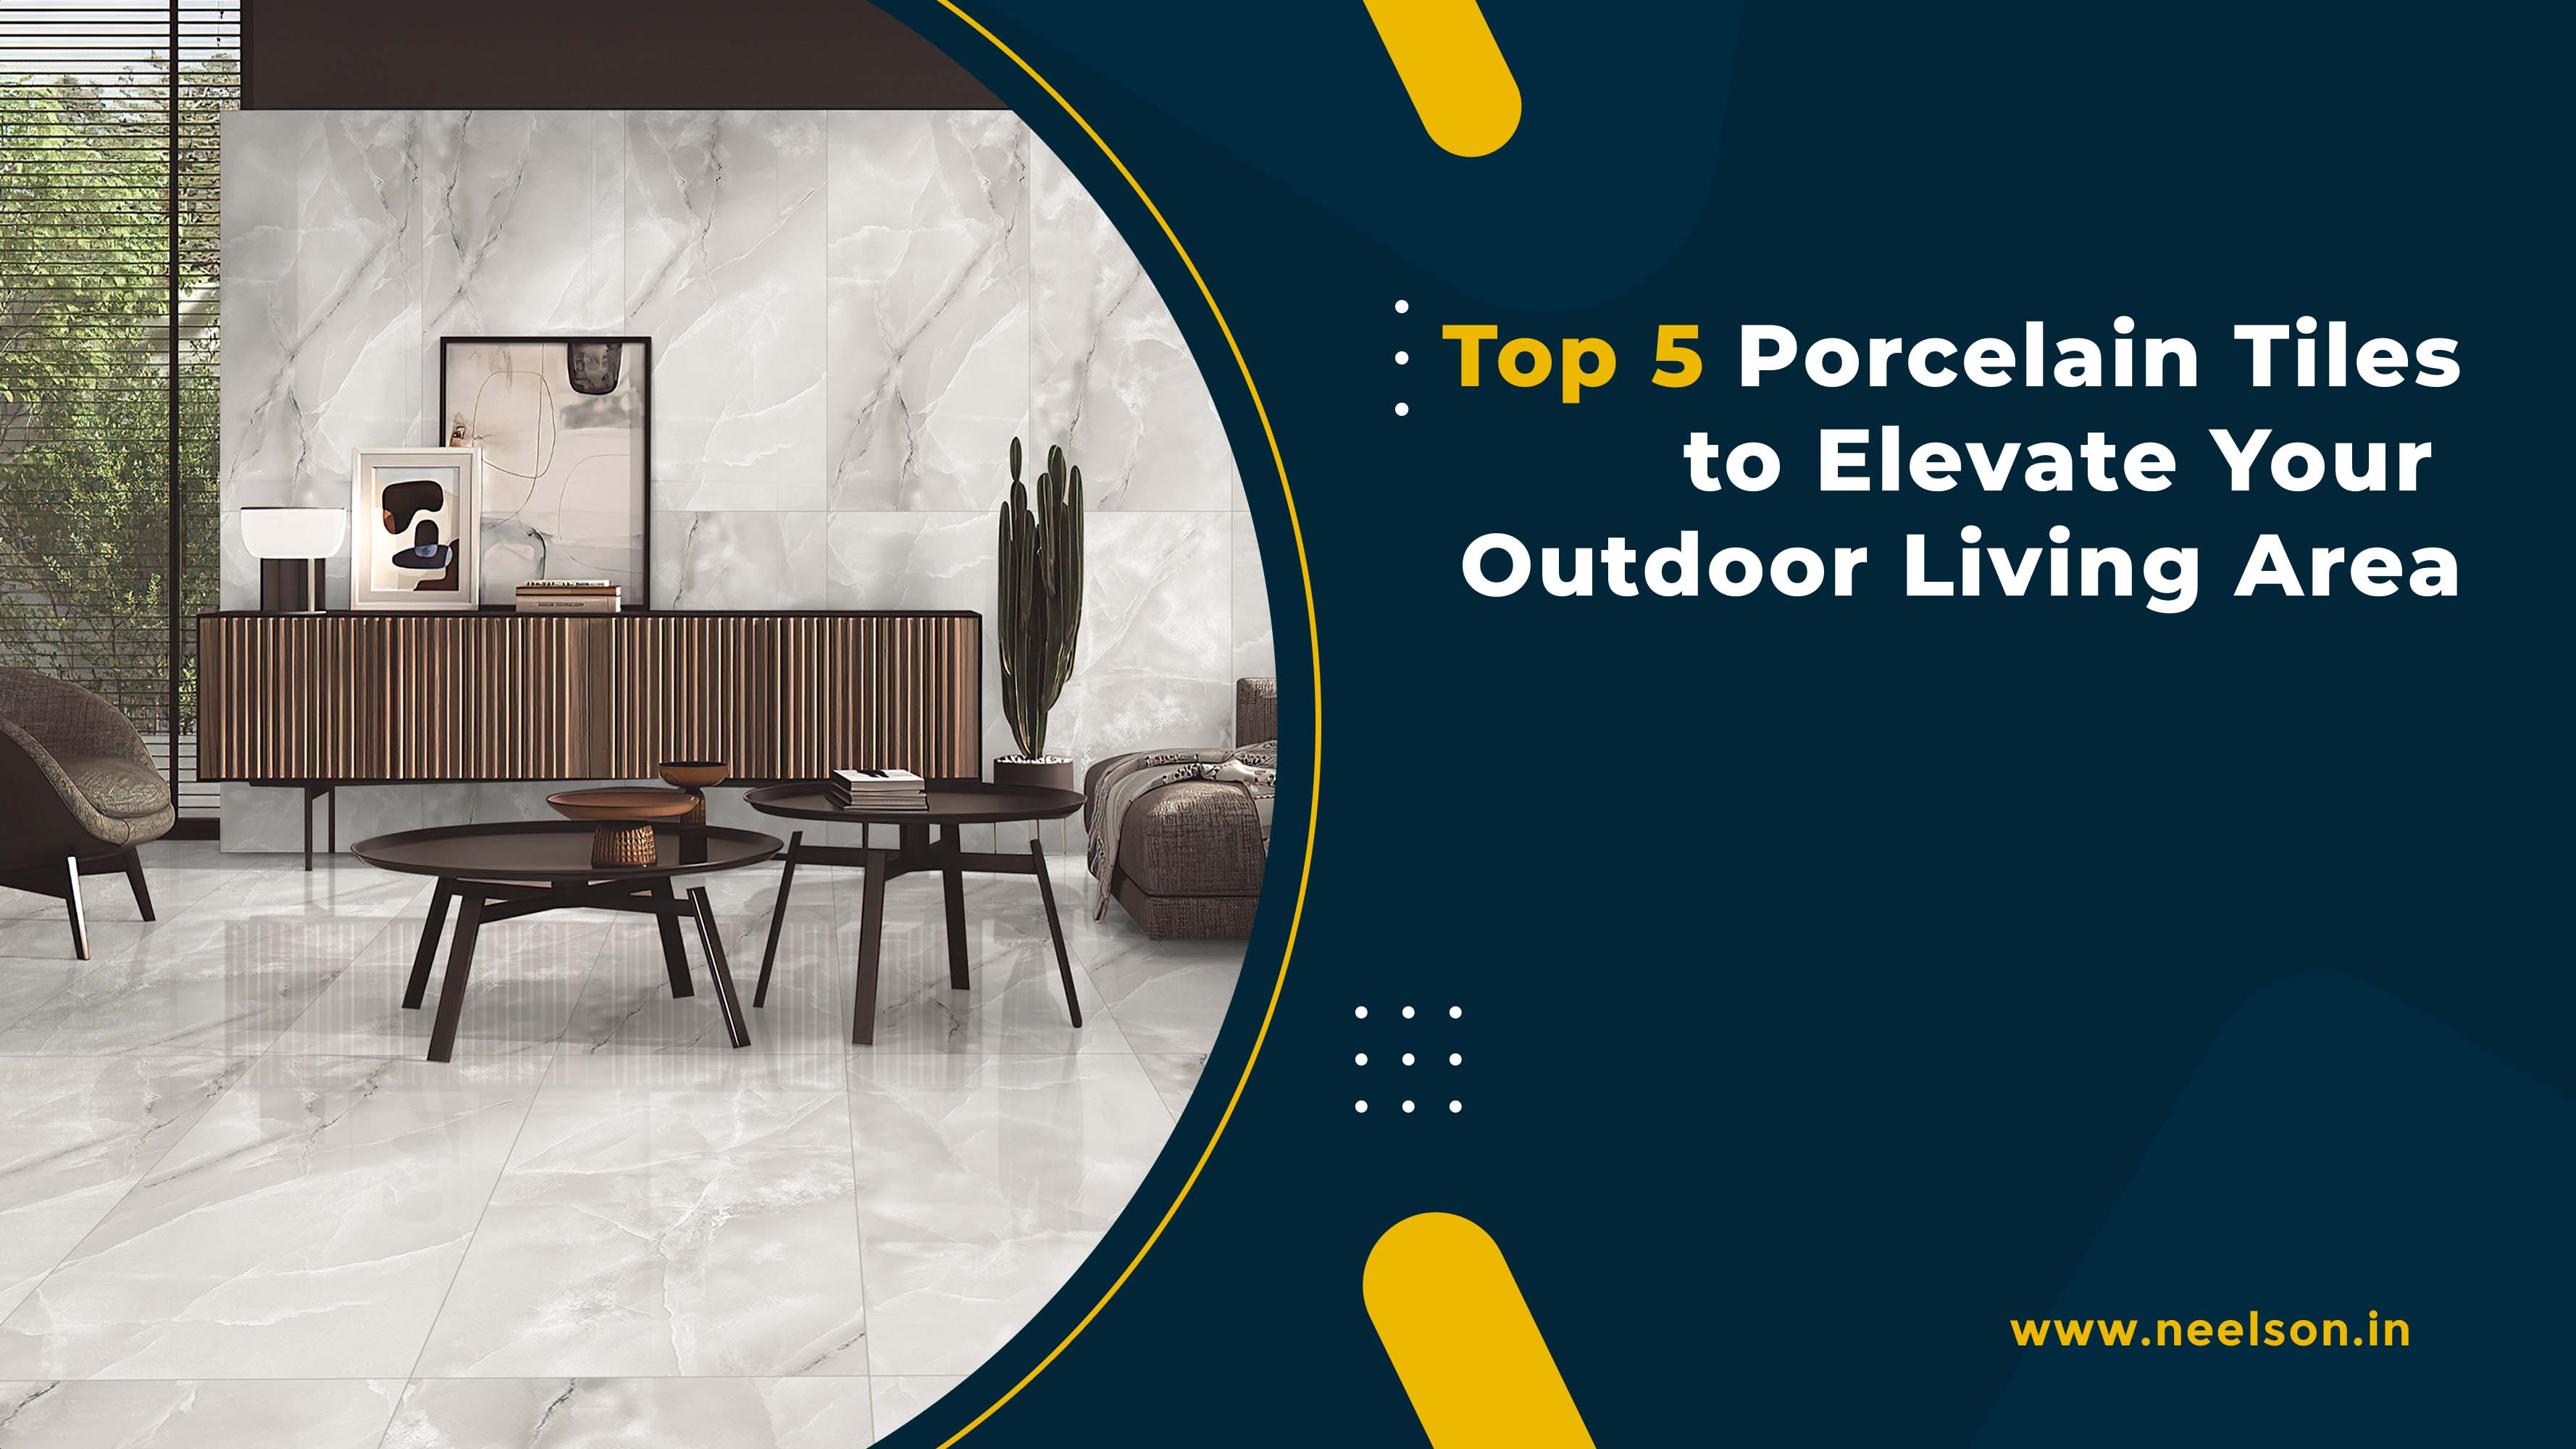 Top 5 Porcelain Tiles to Elevate Your Outdoor Living Area